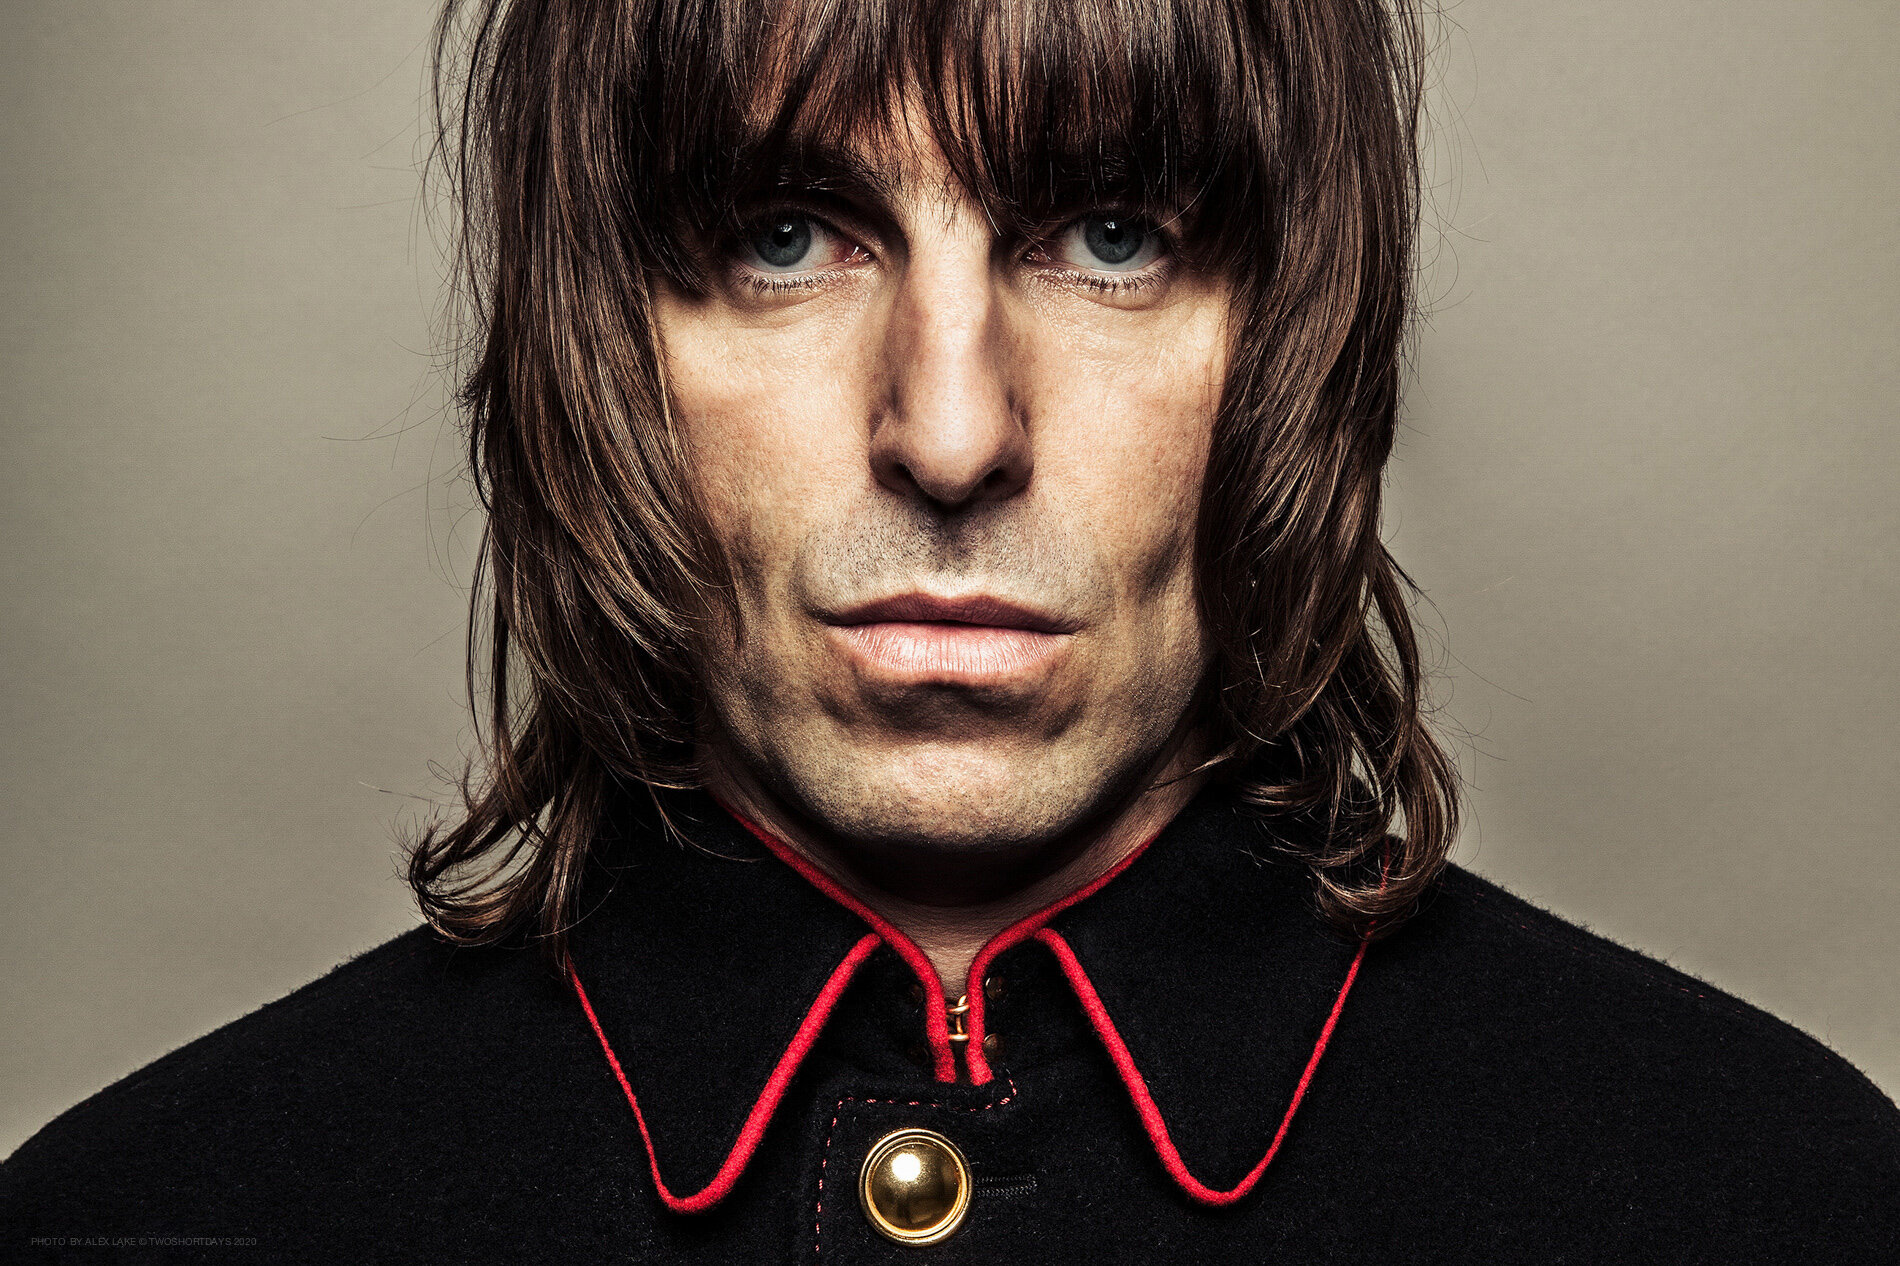 liam_gallagher_photography_copyright_ALEX_LAKE_do_not_reproduce_without_permission_TWOSHORTDAYS.jpg